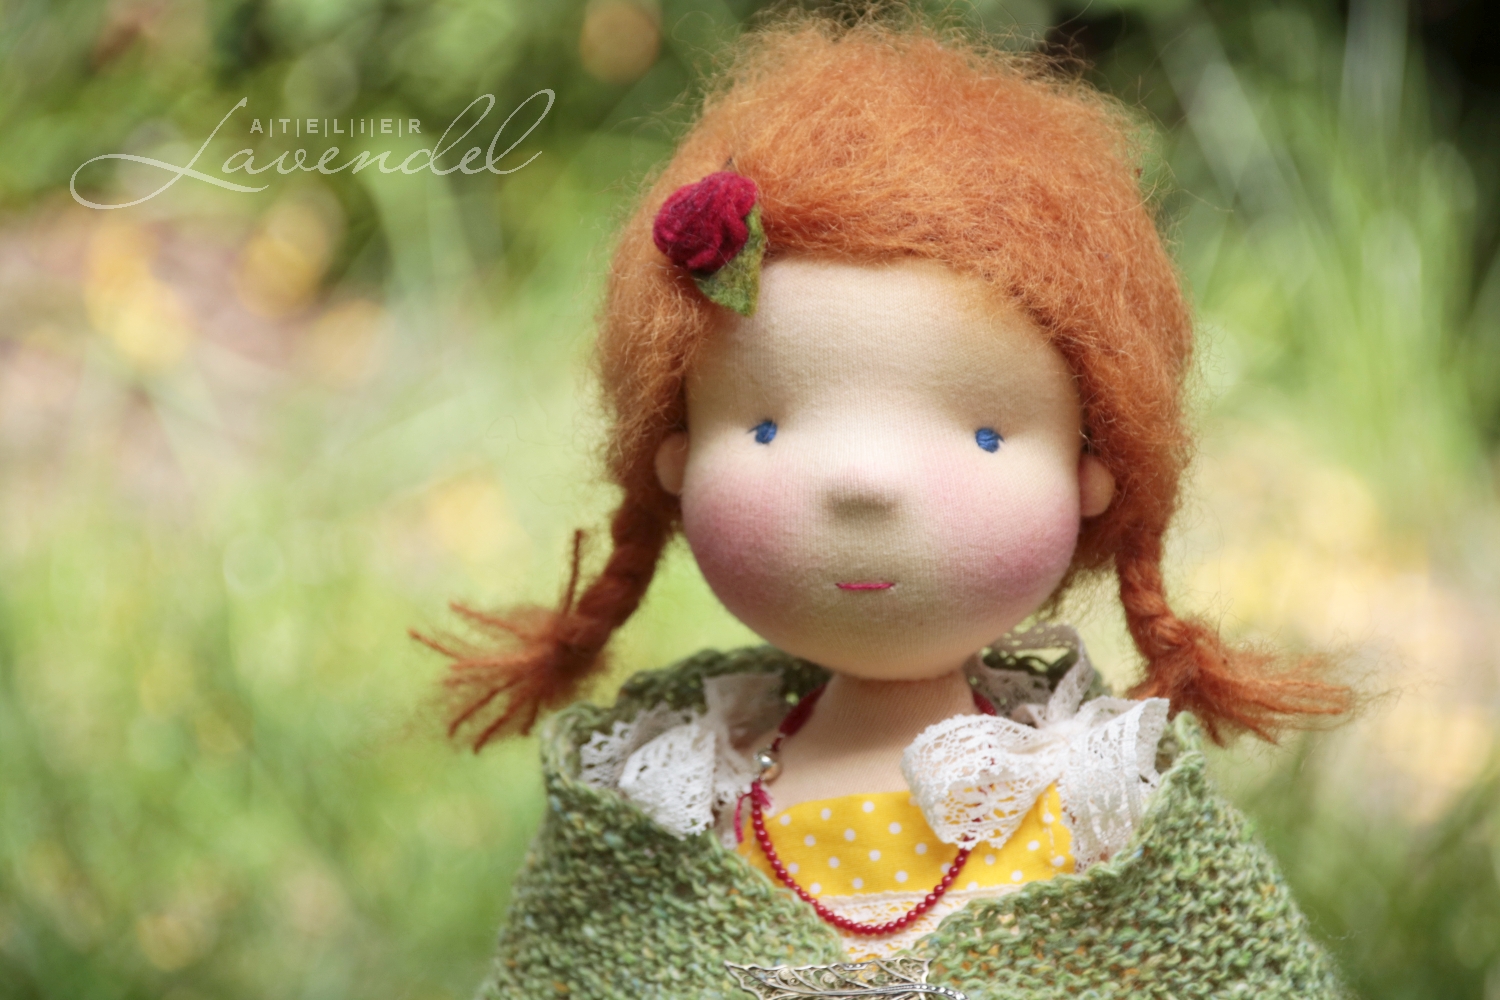 waldorf natural fibers doll handmade by Atelier Lavendel. All natural best quality organic materials. Handmade in Germany.